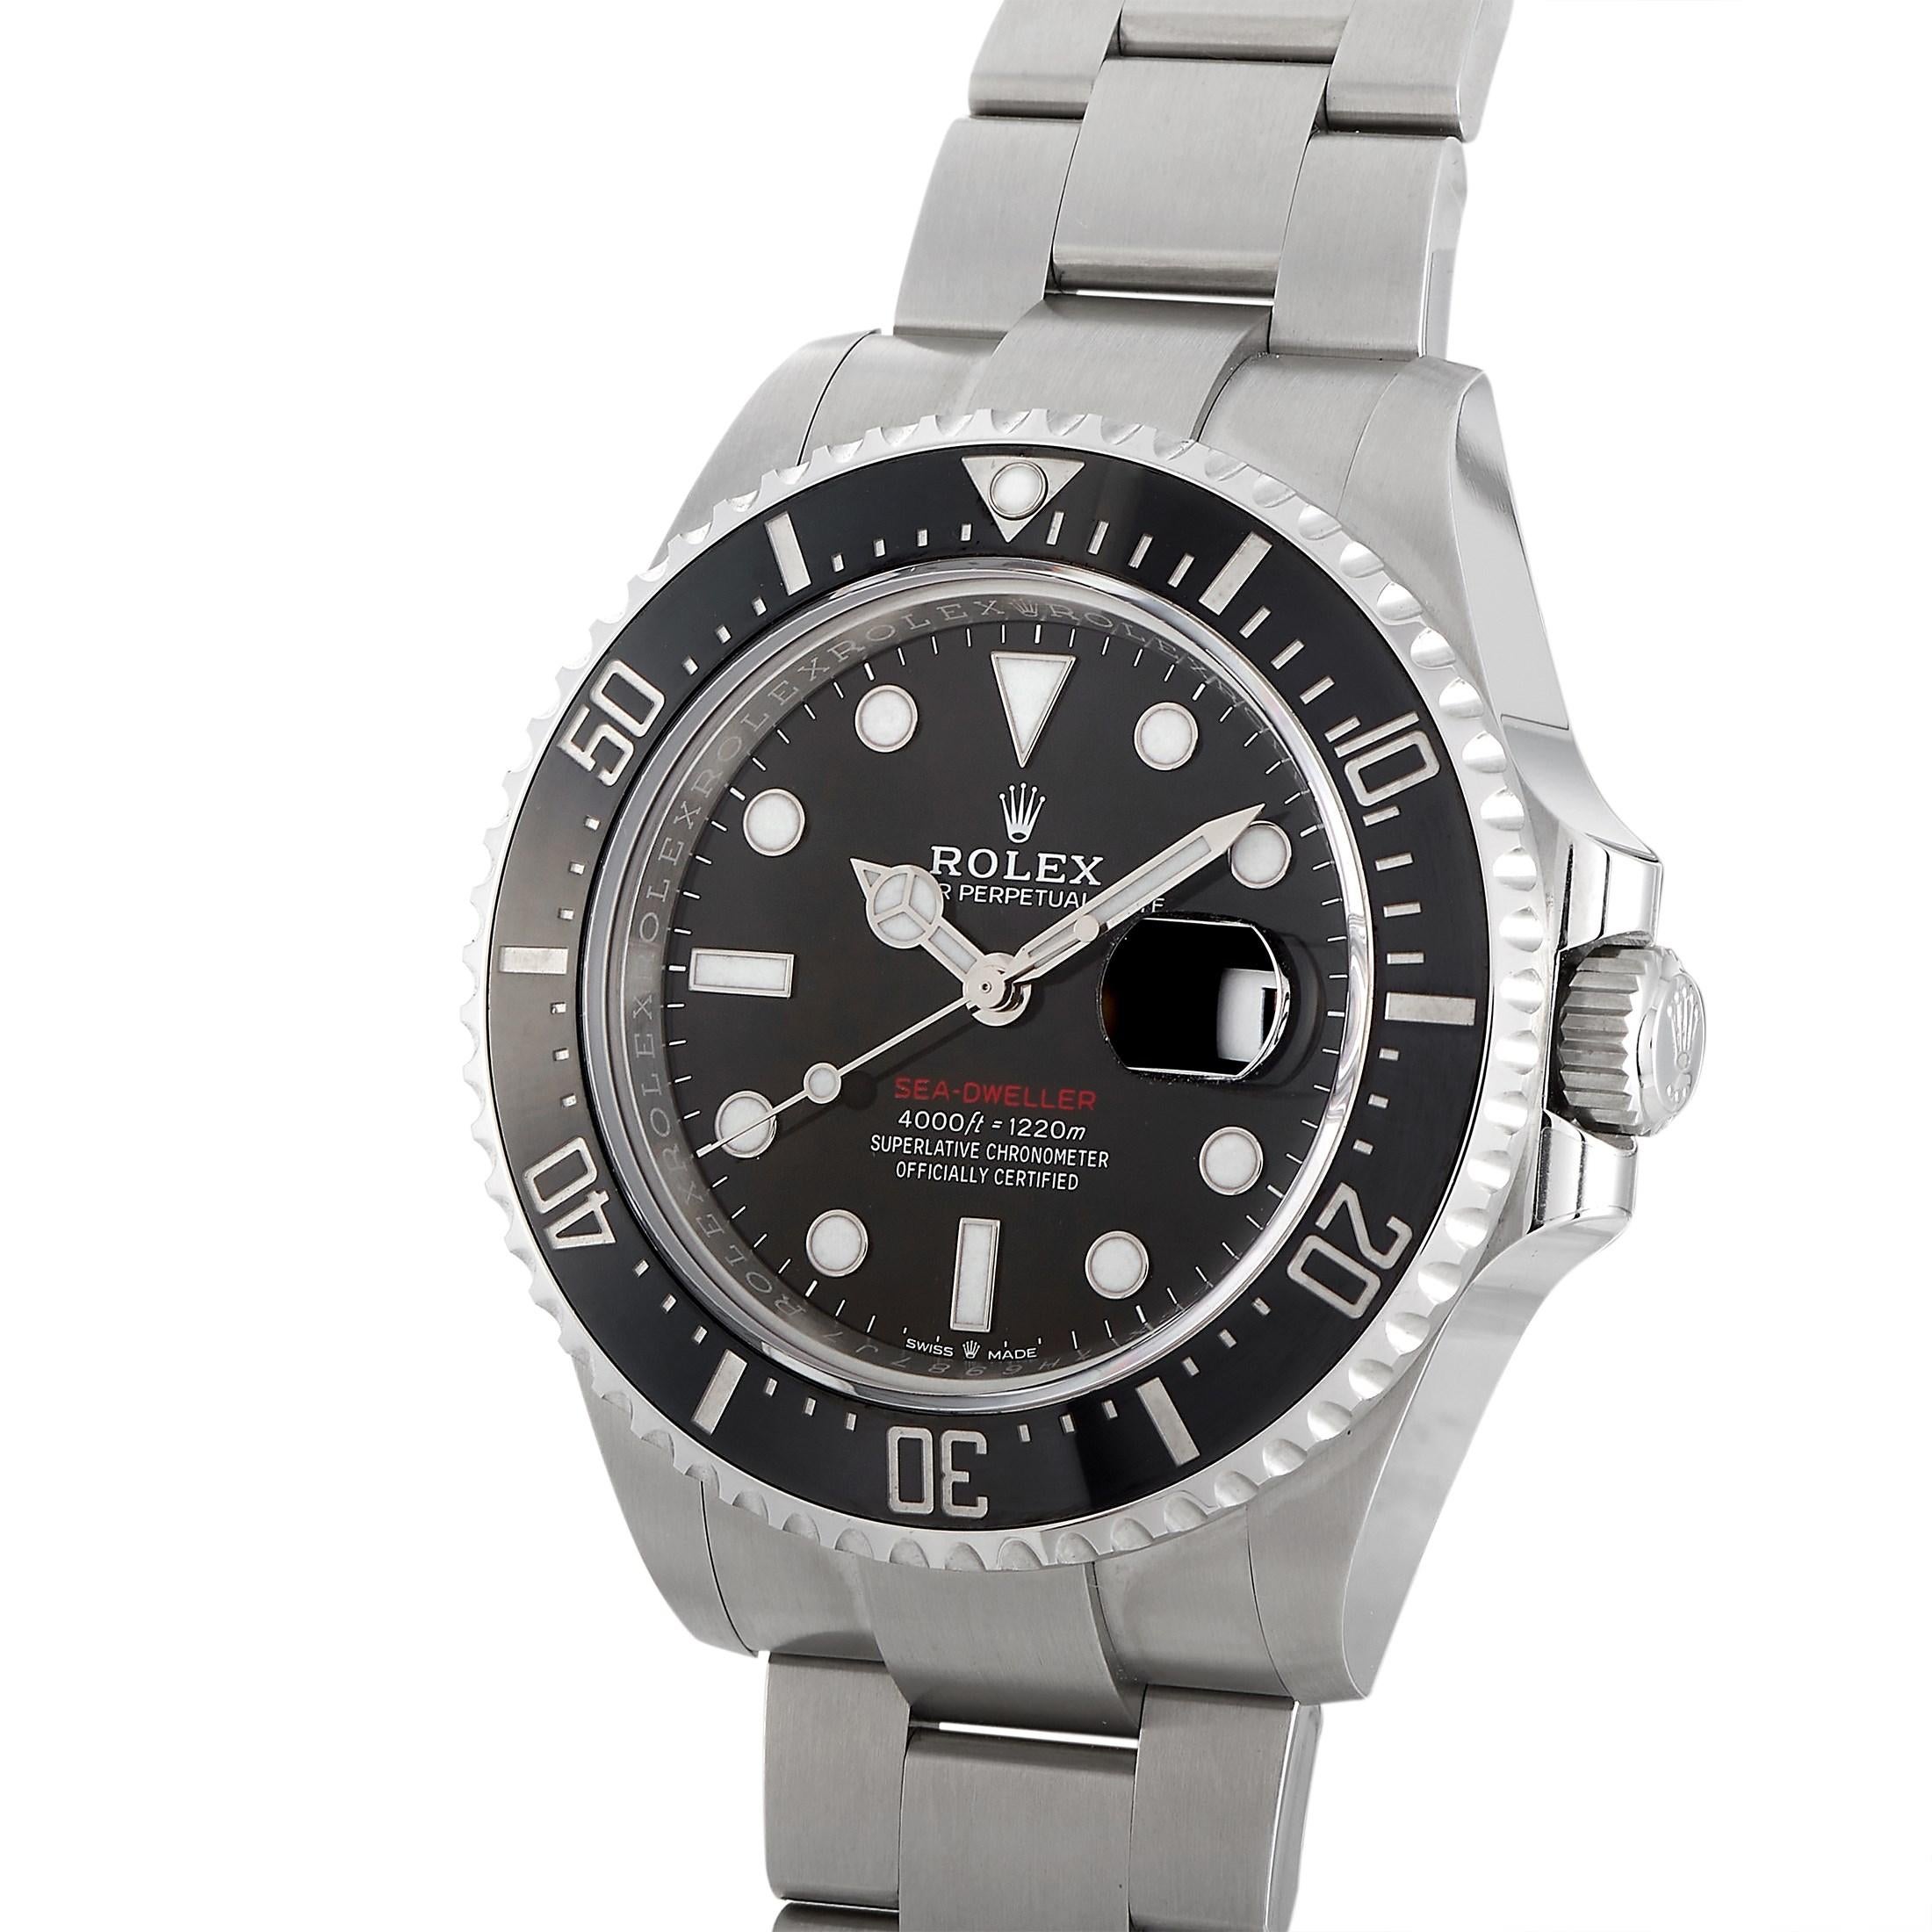 This Rolex Sea-Dweller Oystersteel 43 mm Watch, reference number 126600, includes an oystersteel case measuring 43 mm in diameter with a large black ceramic uni-directional rotating bezel featuring white hour markers. It is presented on a matching